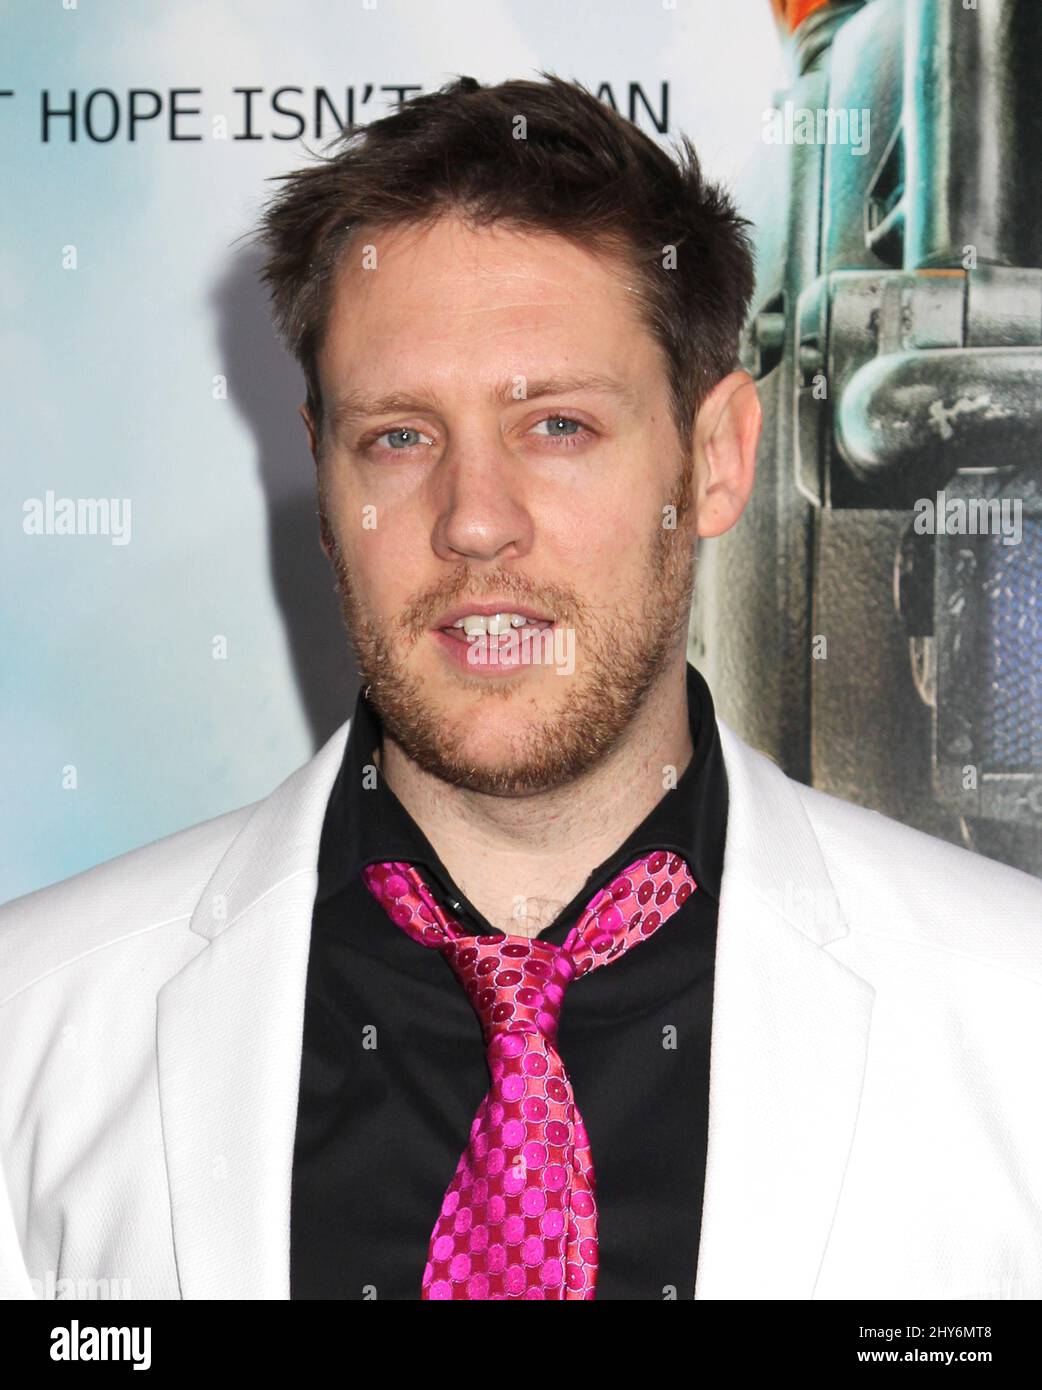 Neill Blomkamp attending the Chappie premiere in New York Stock Photo